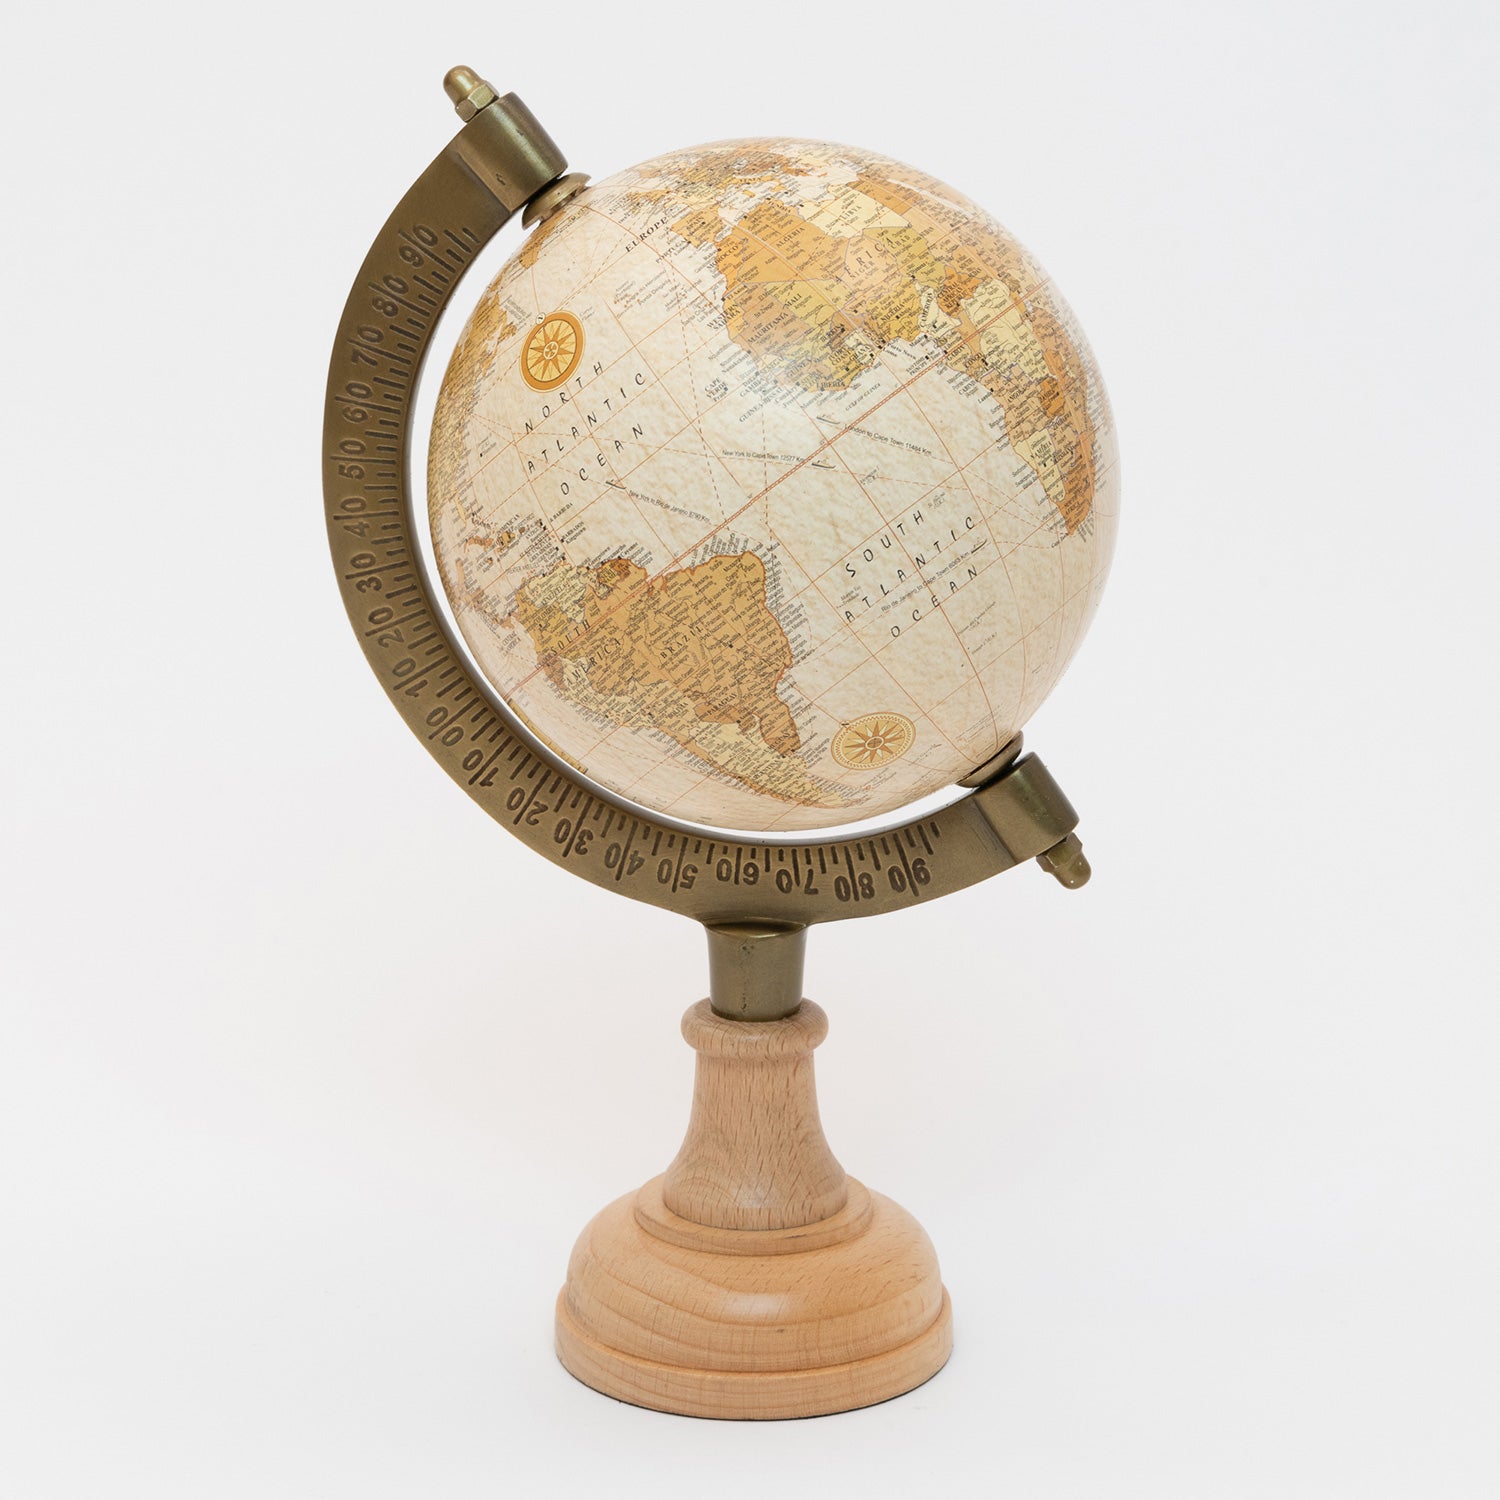 A photo of a Drake's globe pictured on a white background.